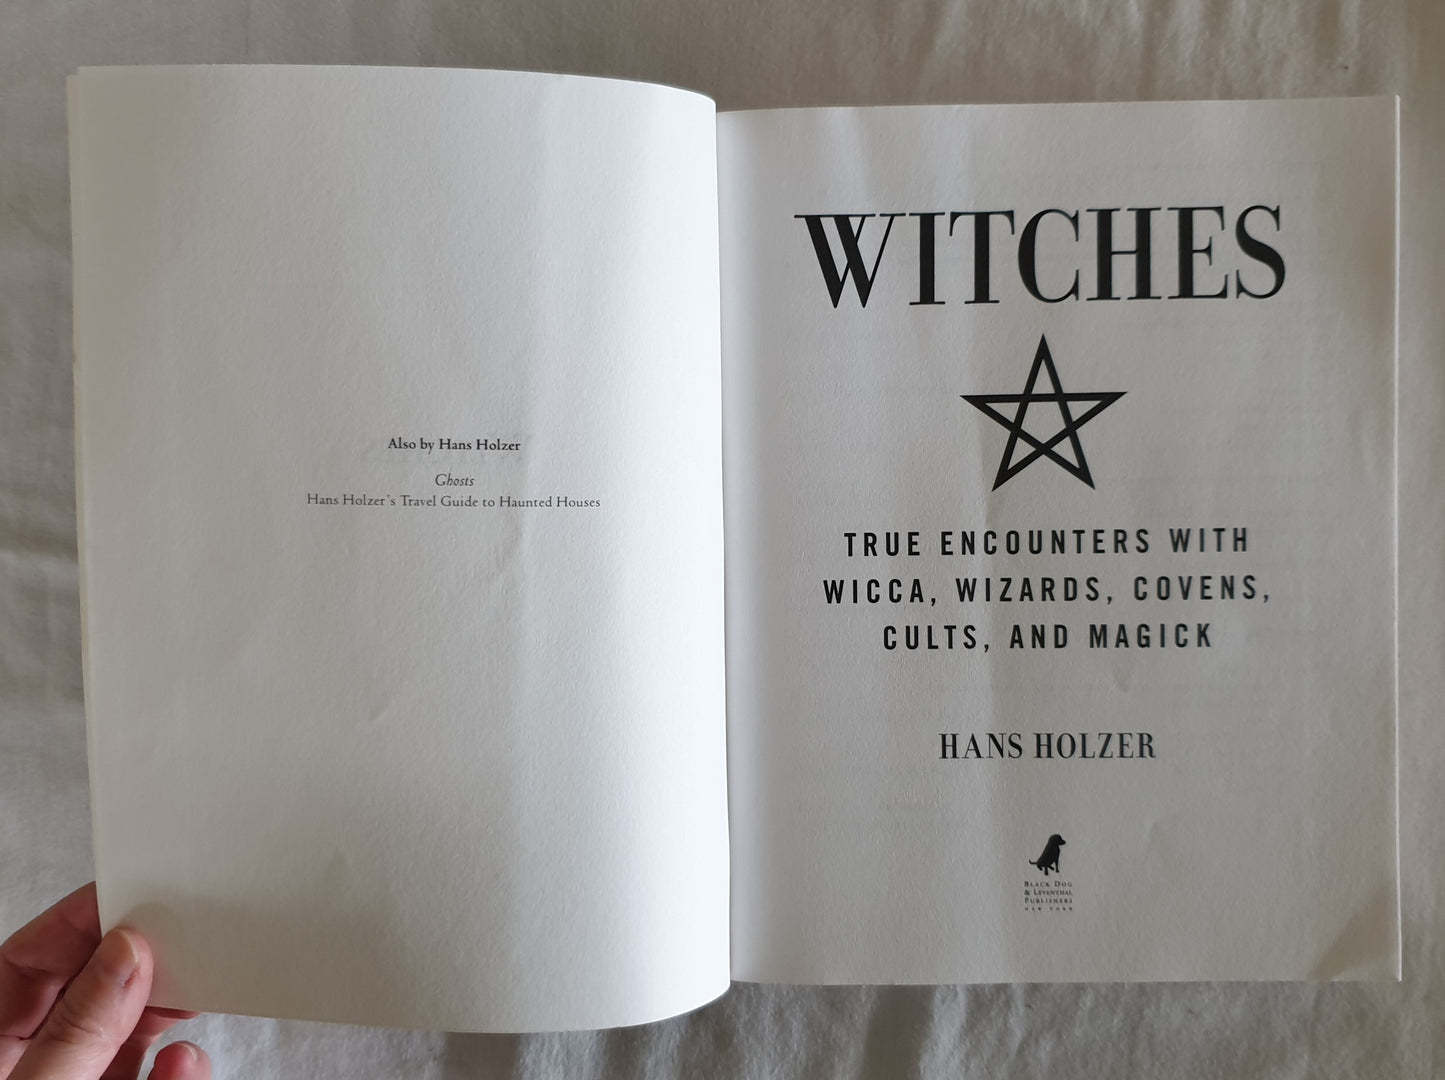 Witches by Hans Holzer